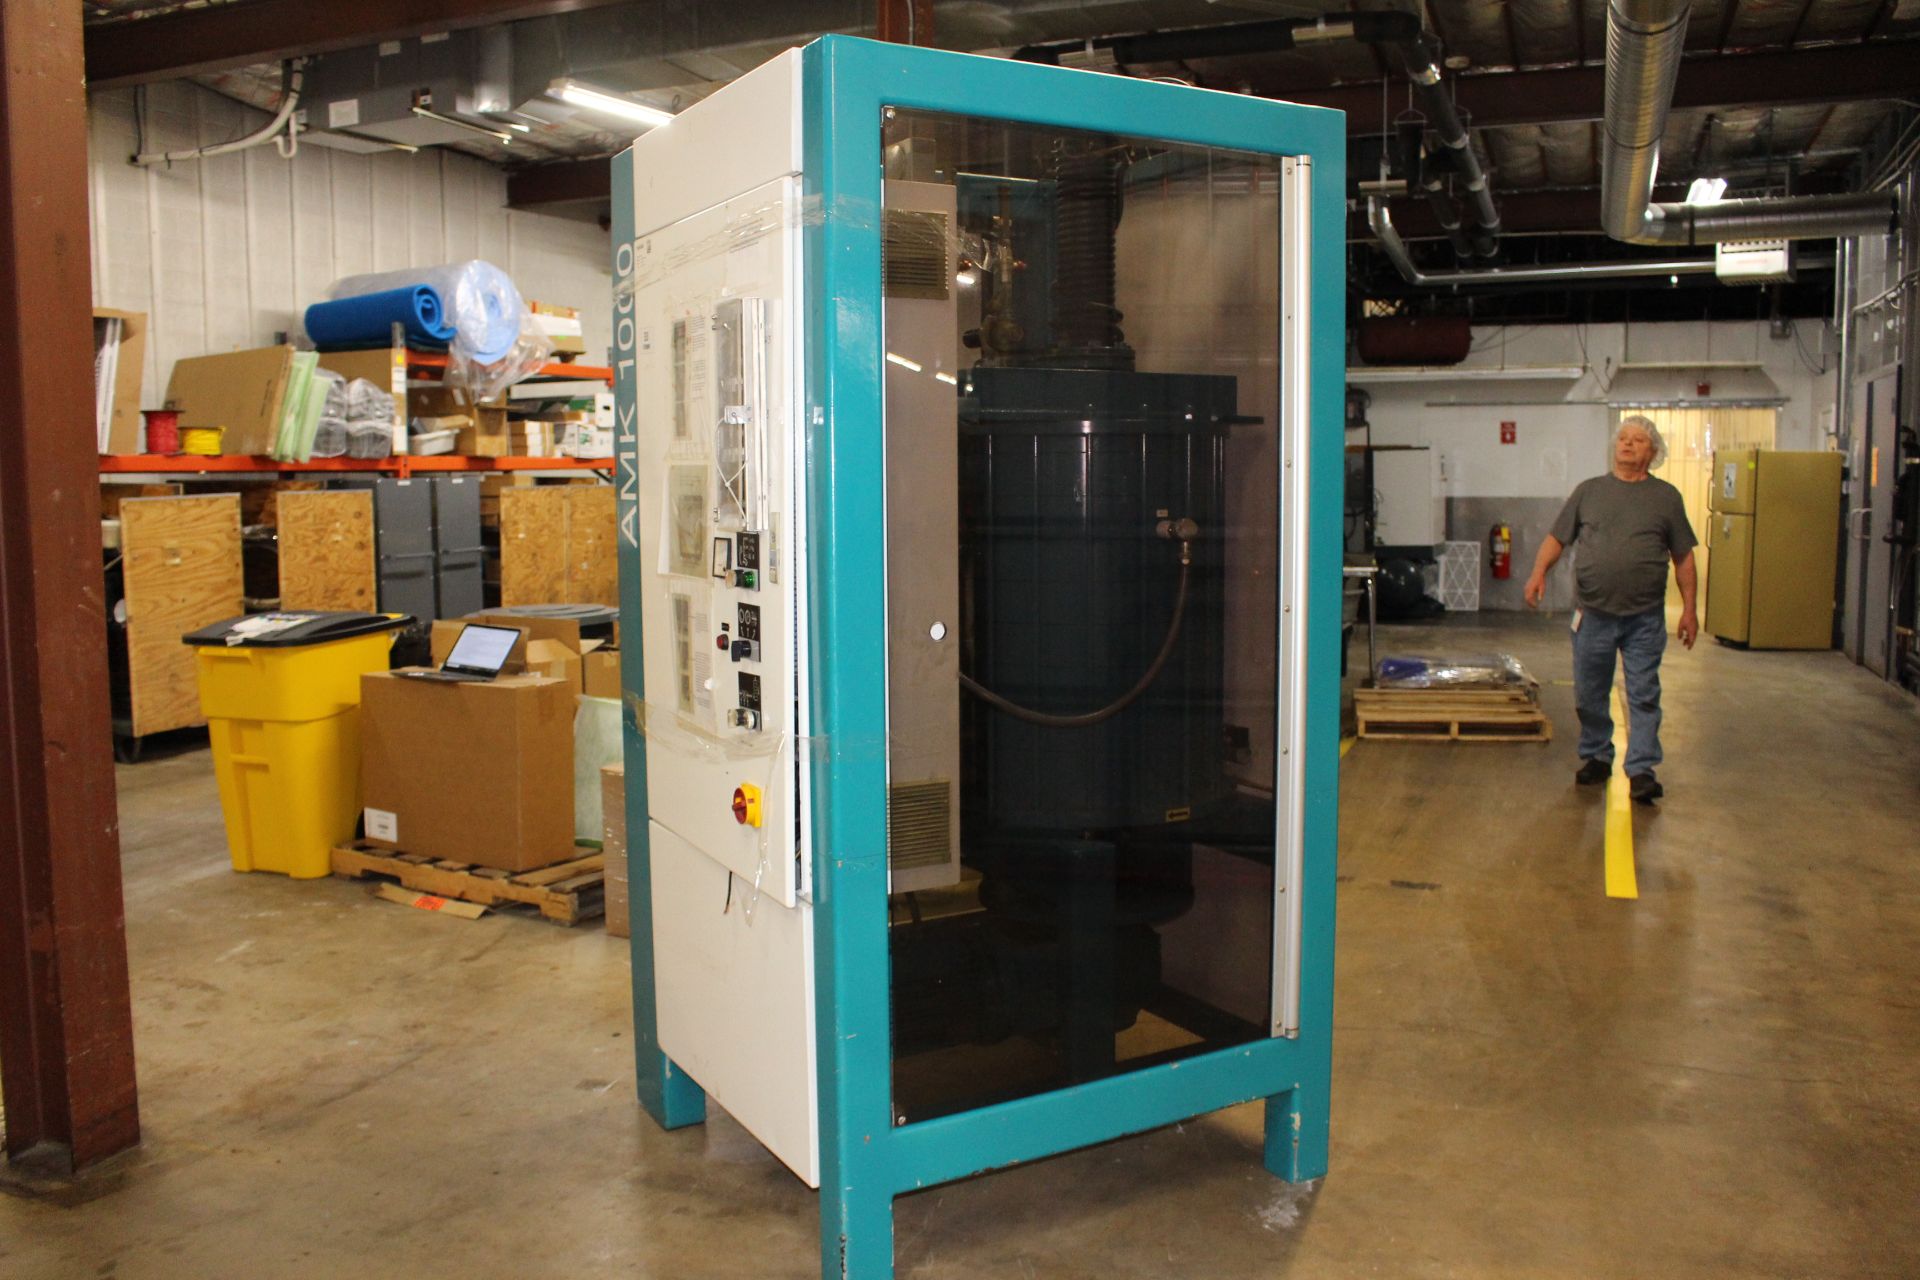 Asset 33 - Aasted AMK-1000 1000 kg/hr Tempering Unit serial#3289-03-001 built 2002, 3 stages with - Image 4 of 8